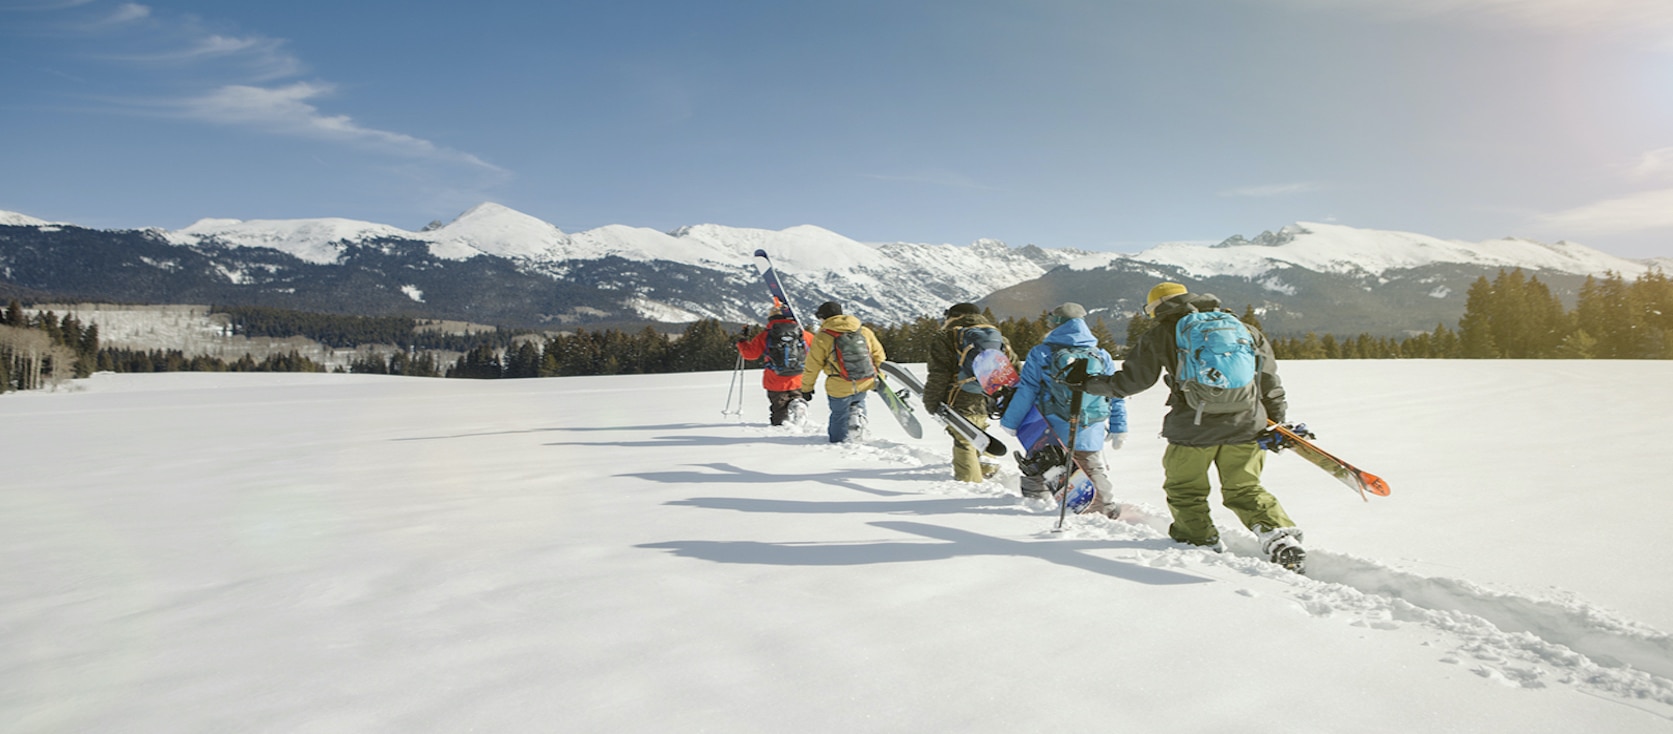 five skiers holding their skis walking through the snow with mountains in the background